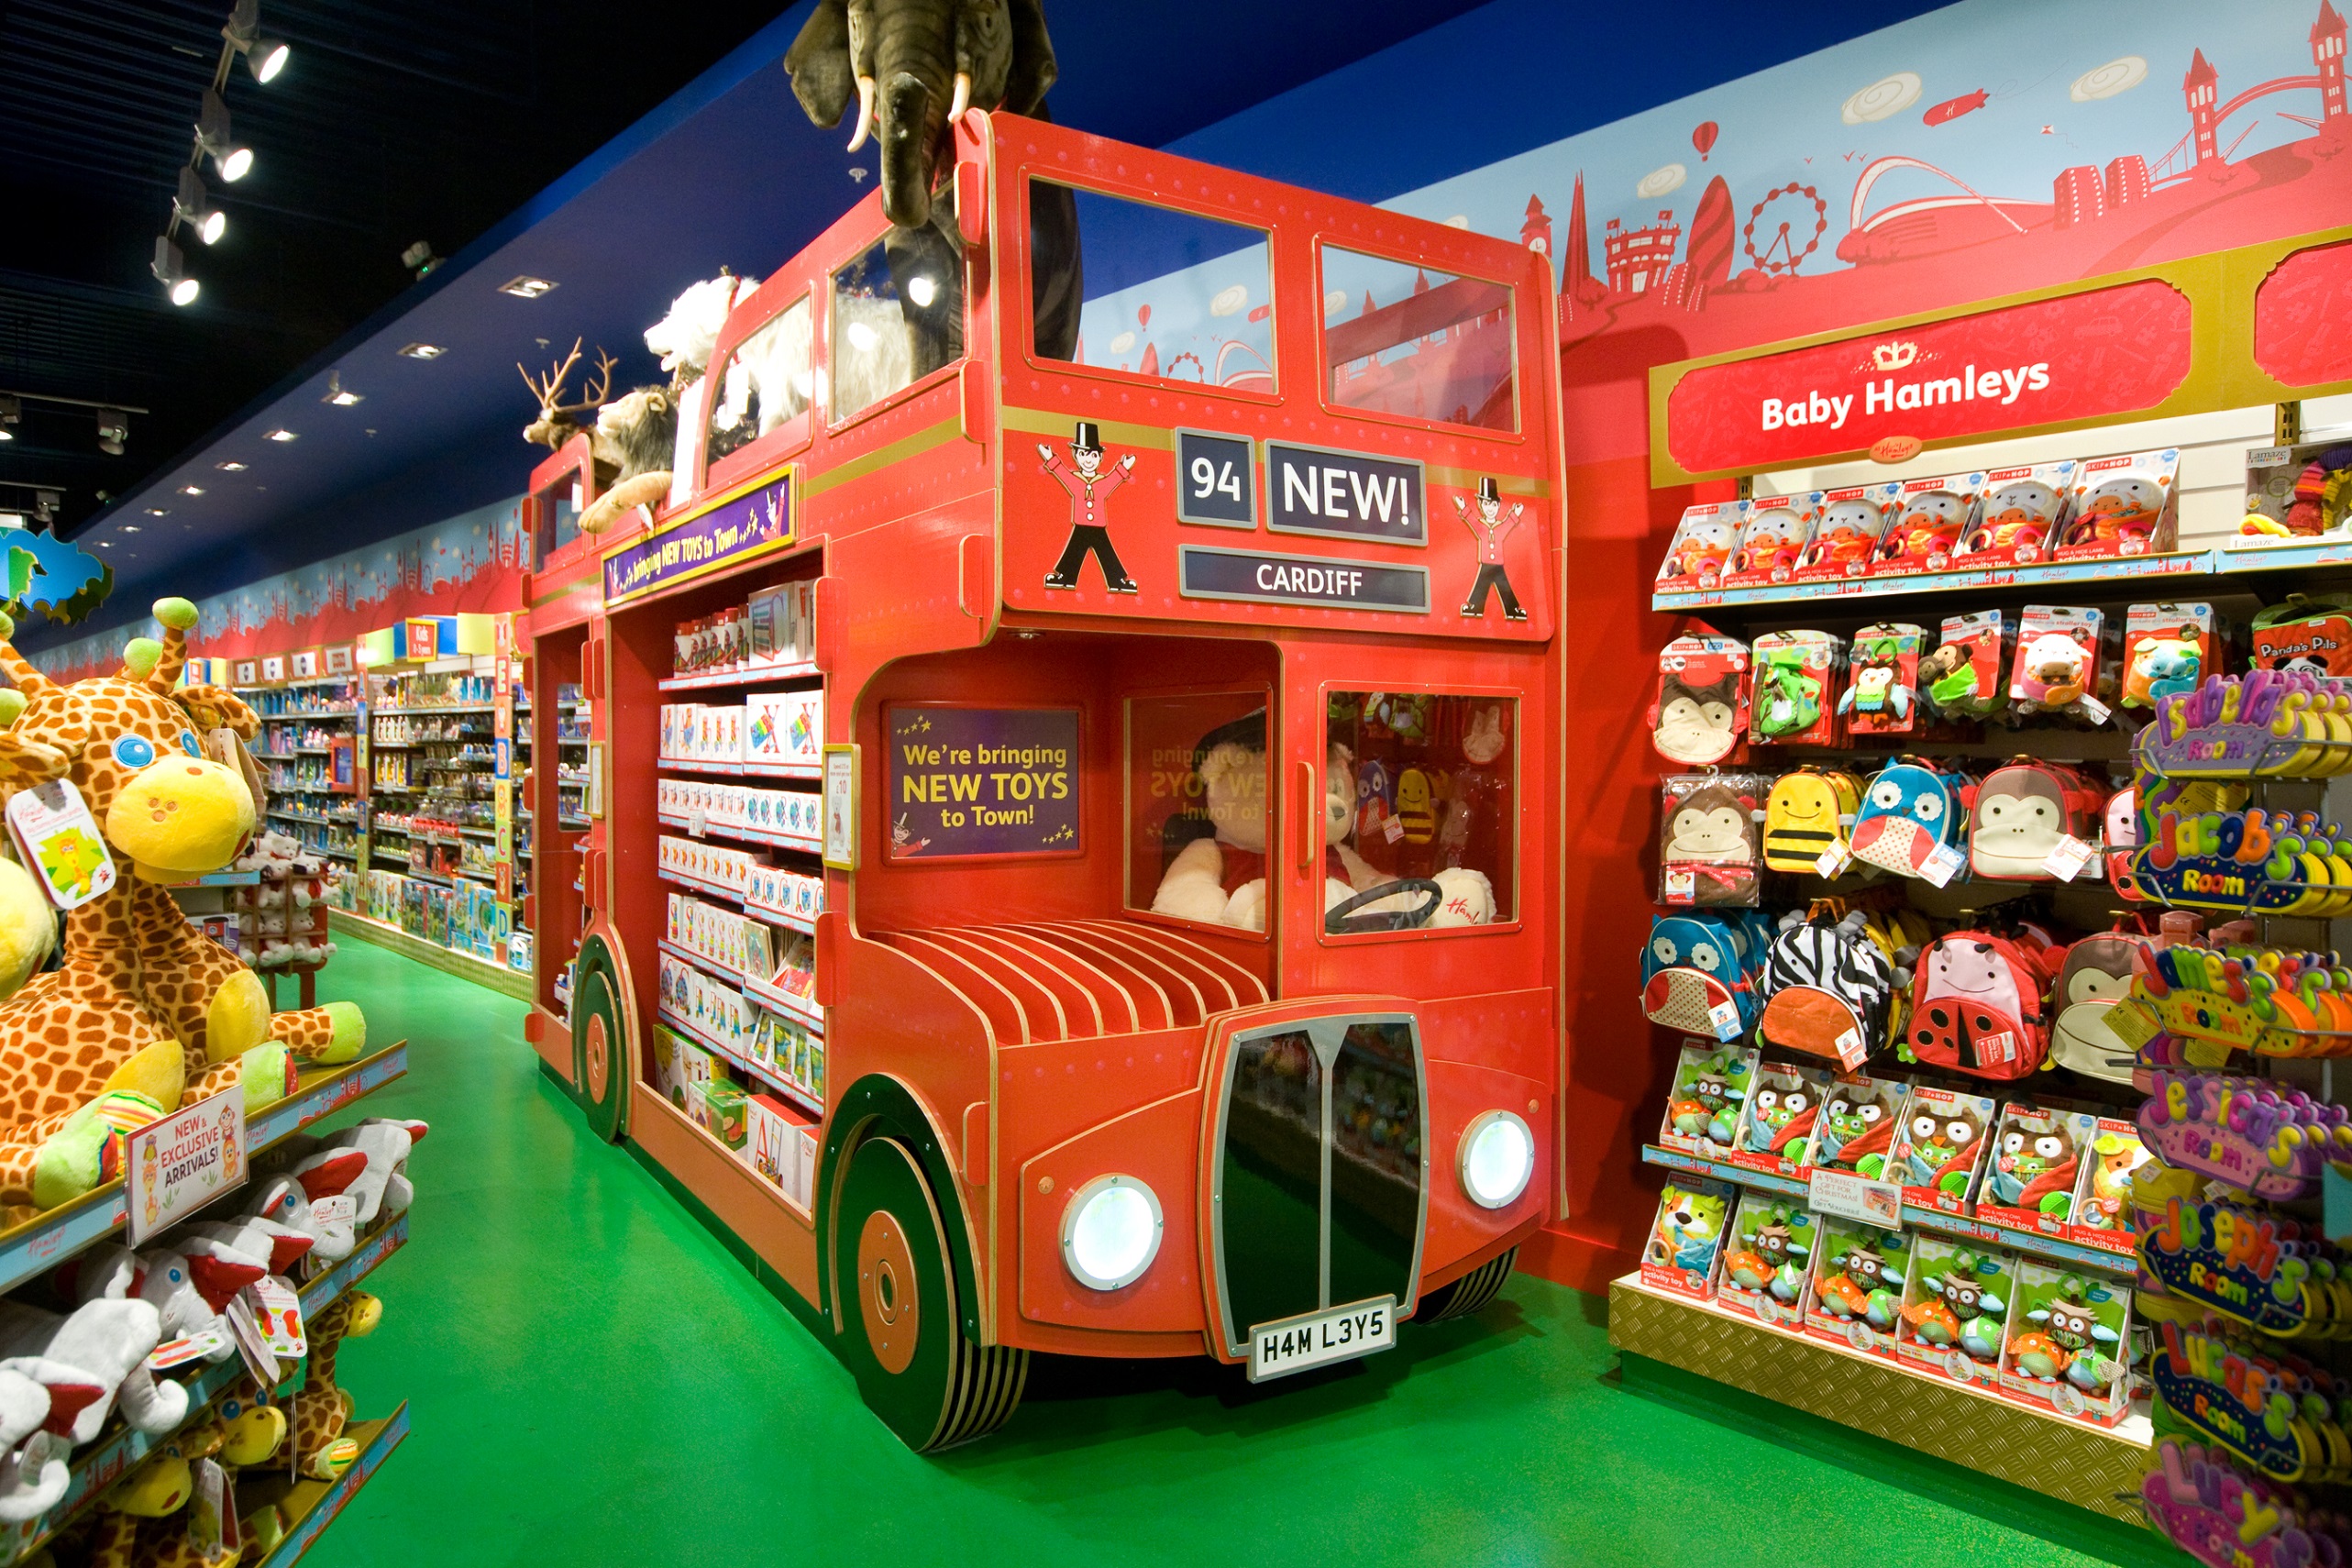 Inside peek of Hamley's. Here pictured is the iconic "London Bus". 